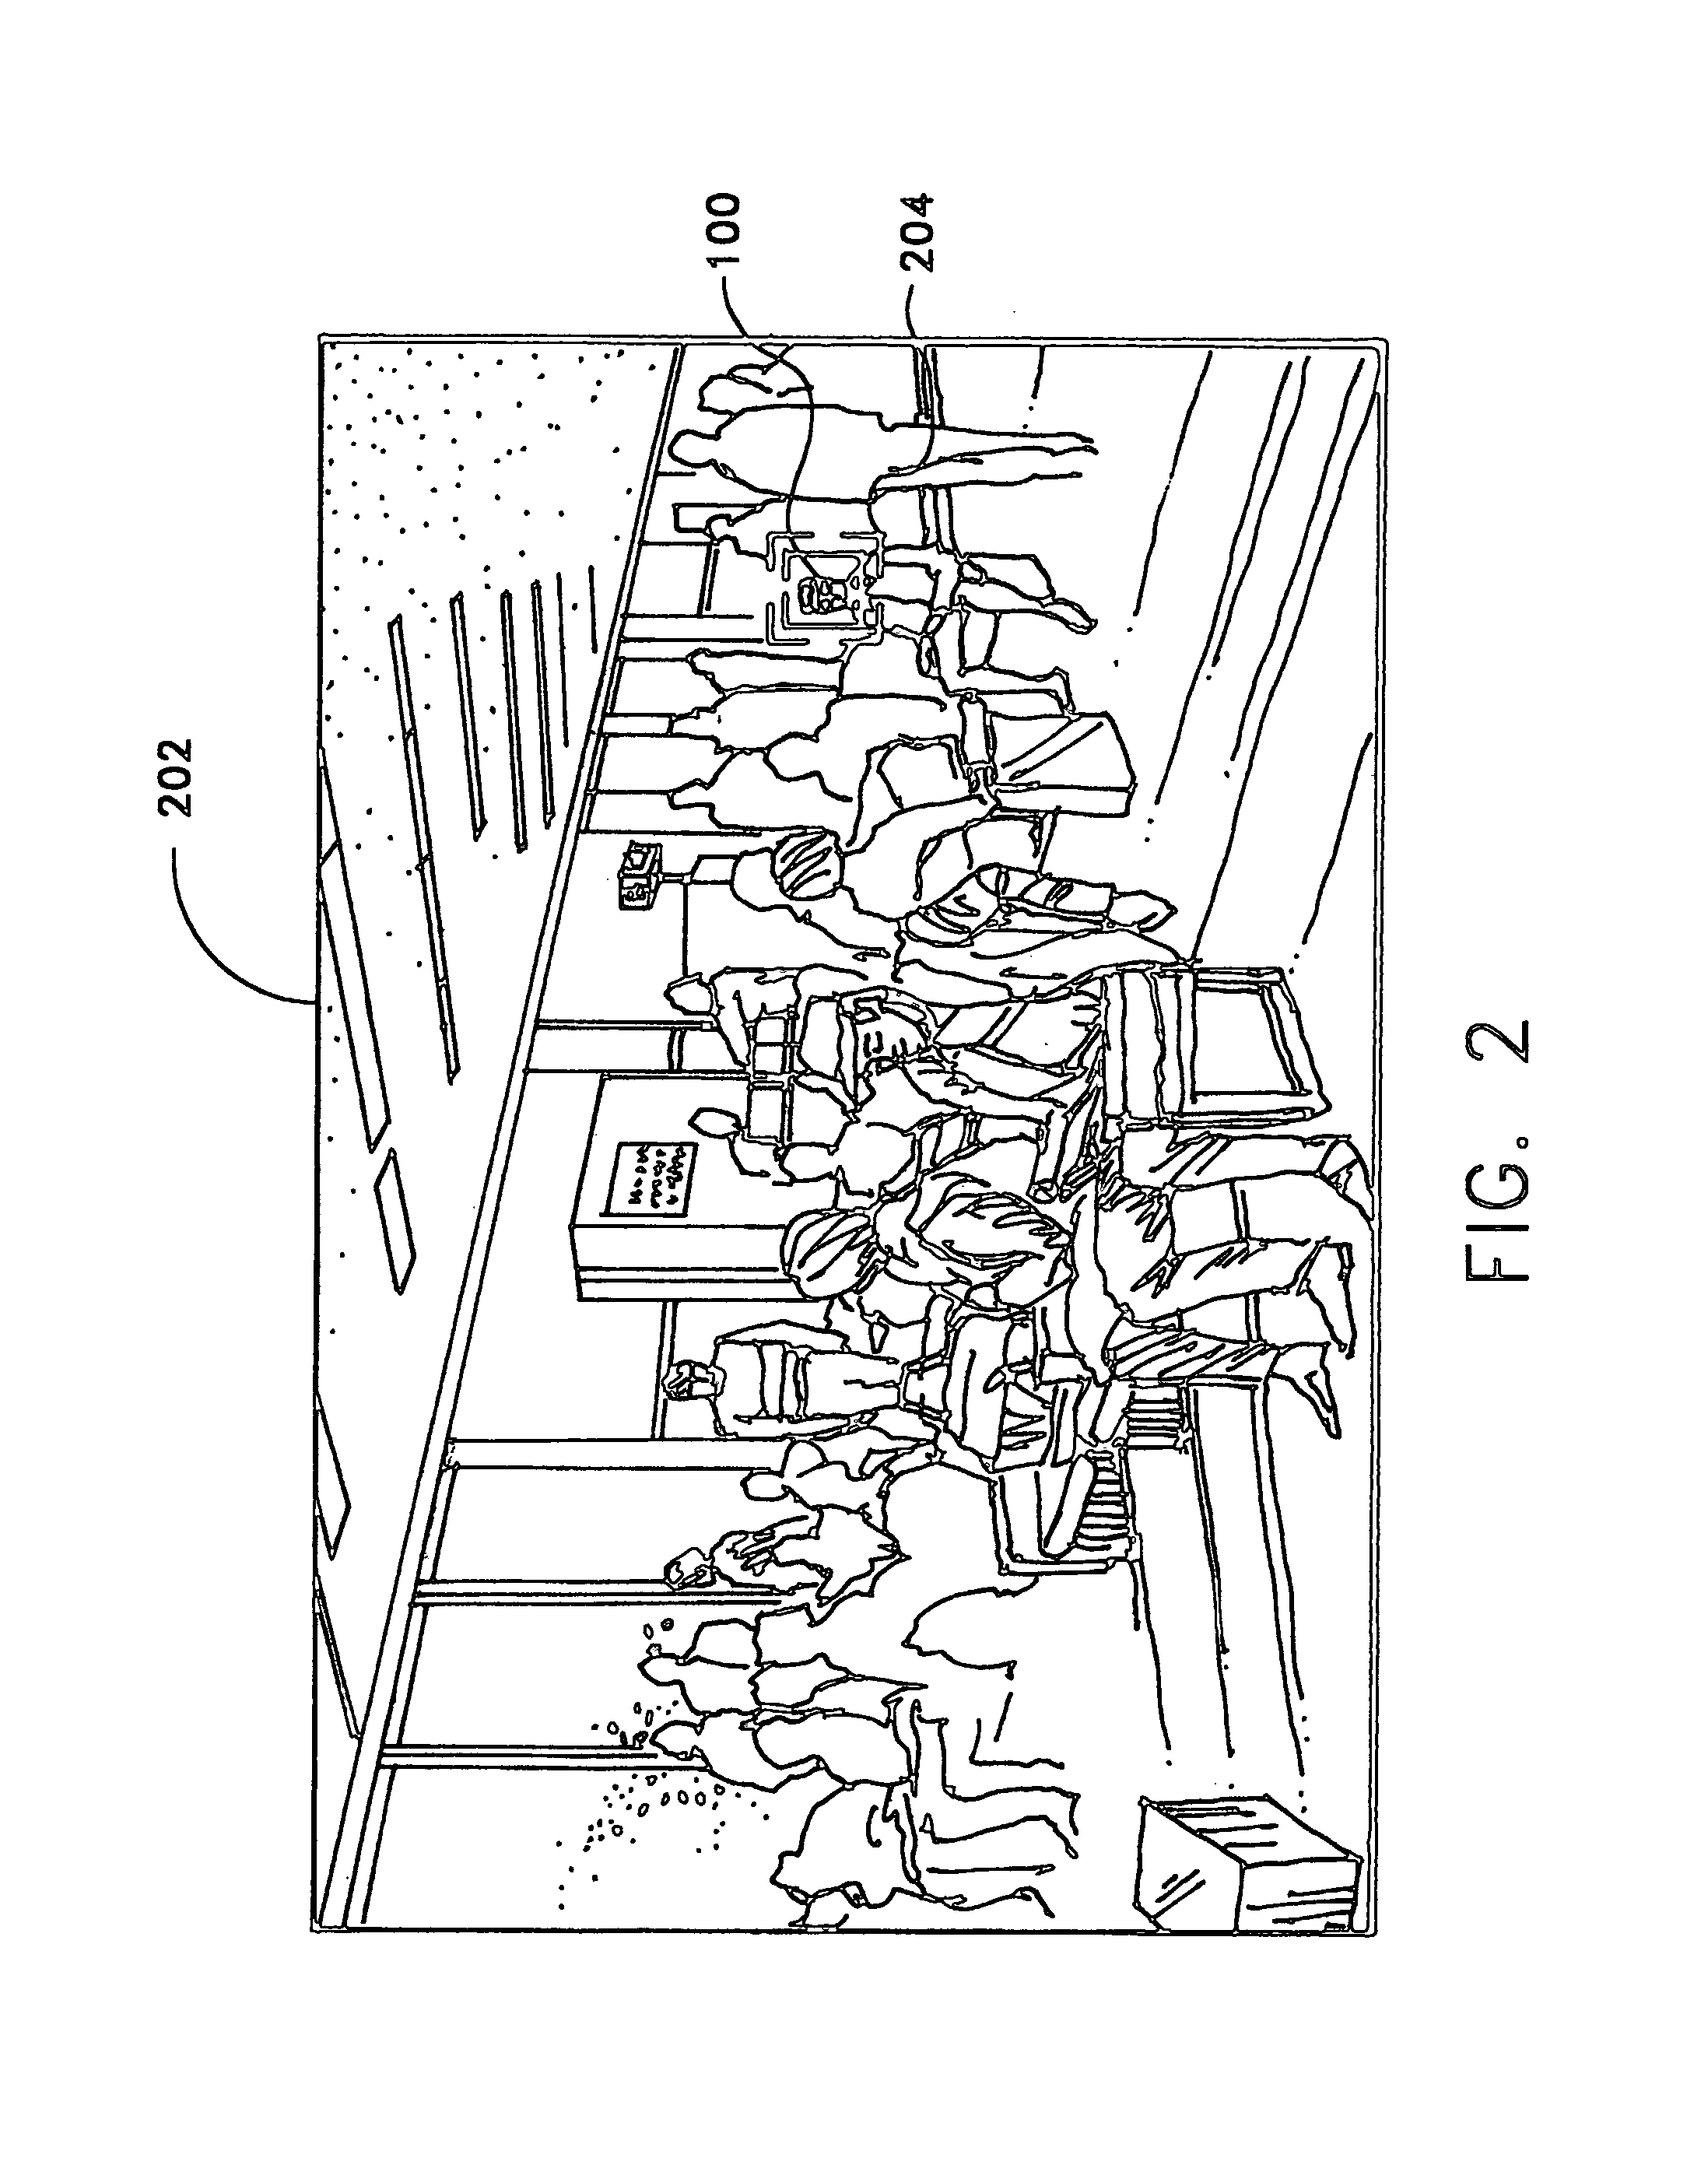 Systems and methods for location of objects